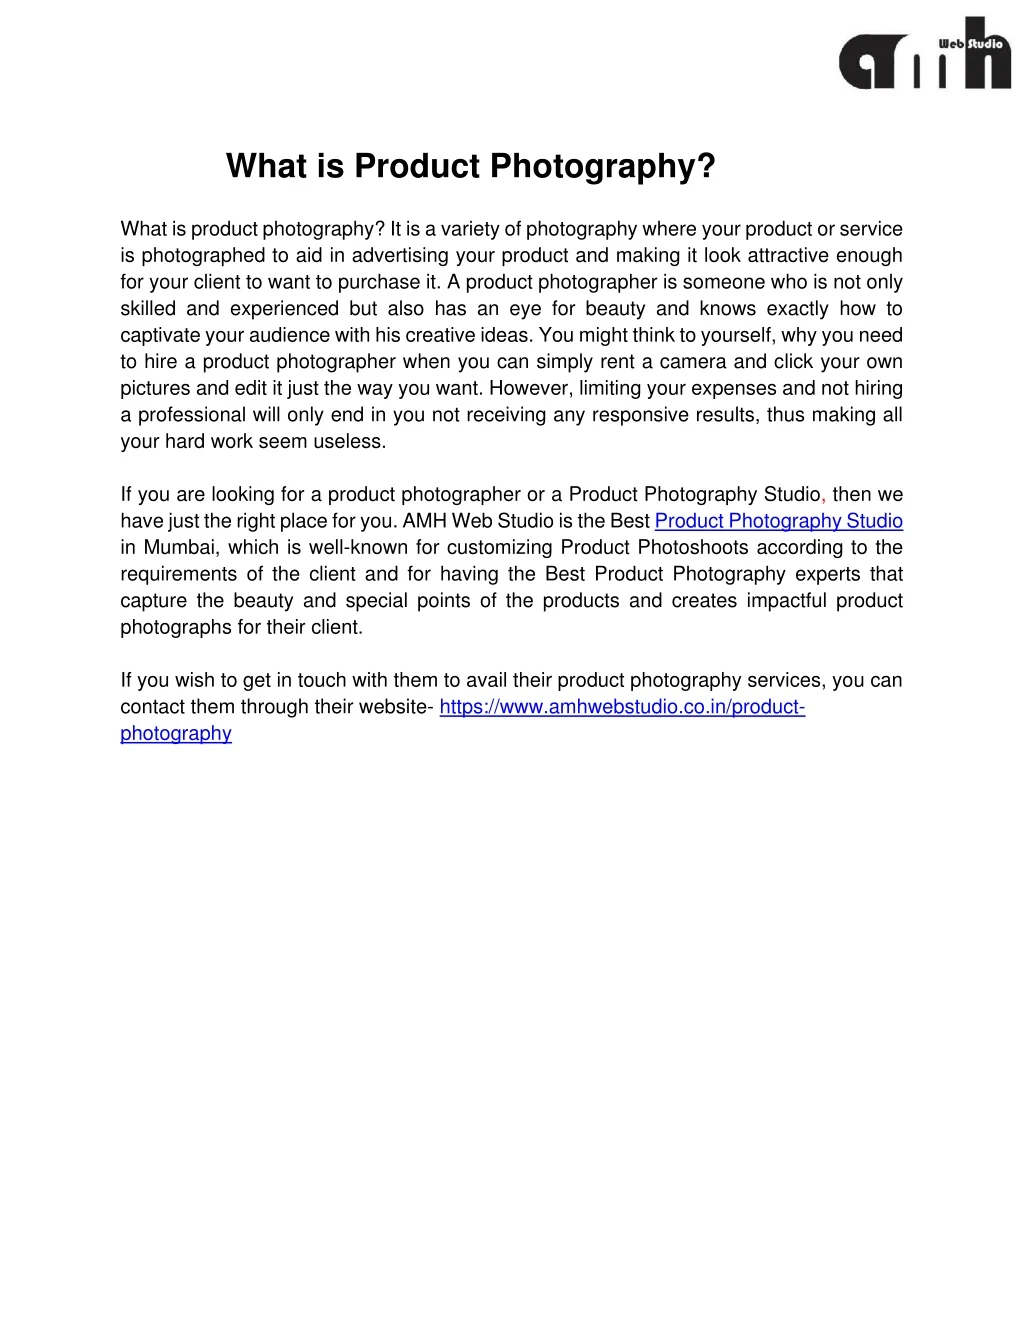 what is product photography